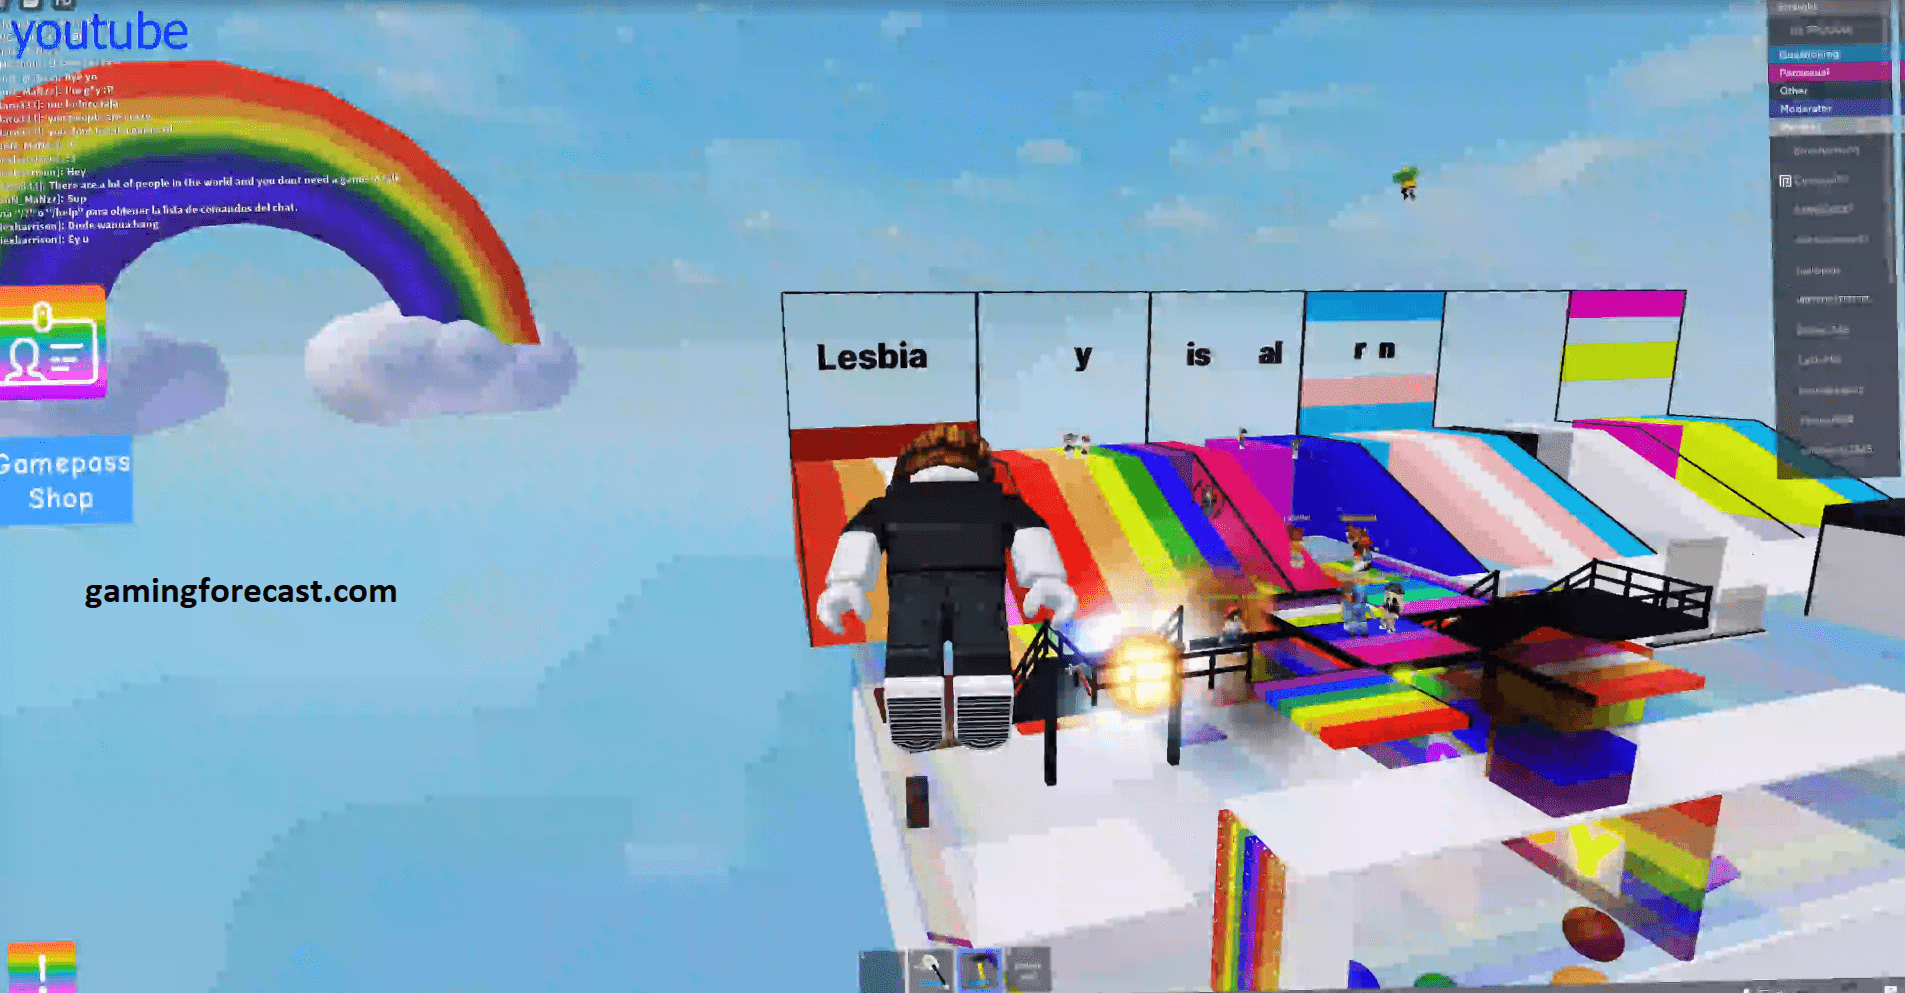 Roblox Hack Download Pc Destroy Lobby Fly Aimbot Scripts 2021 Gaming Forecast Download Free Online Game Hacks - how to hack roblox on pc